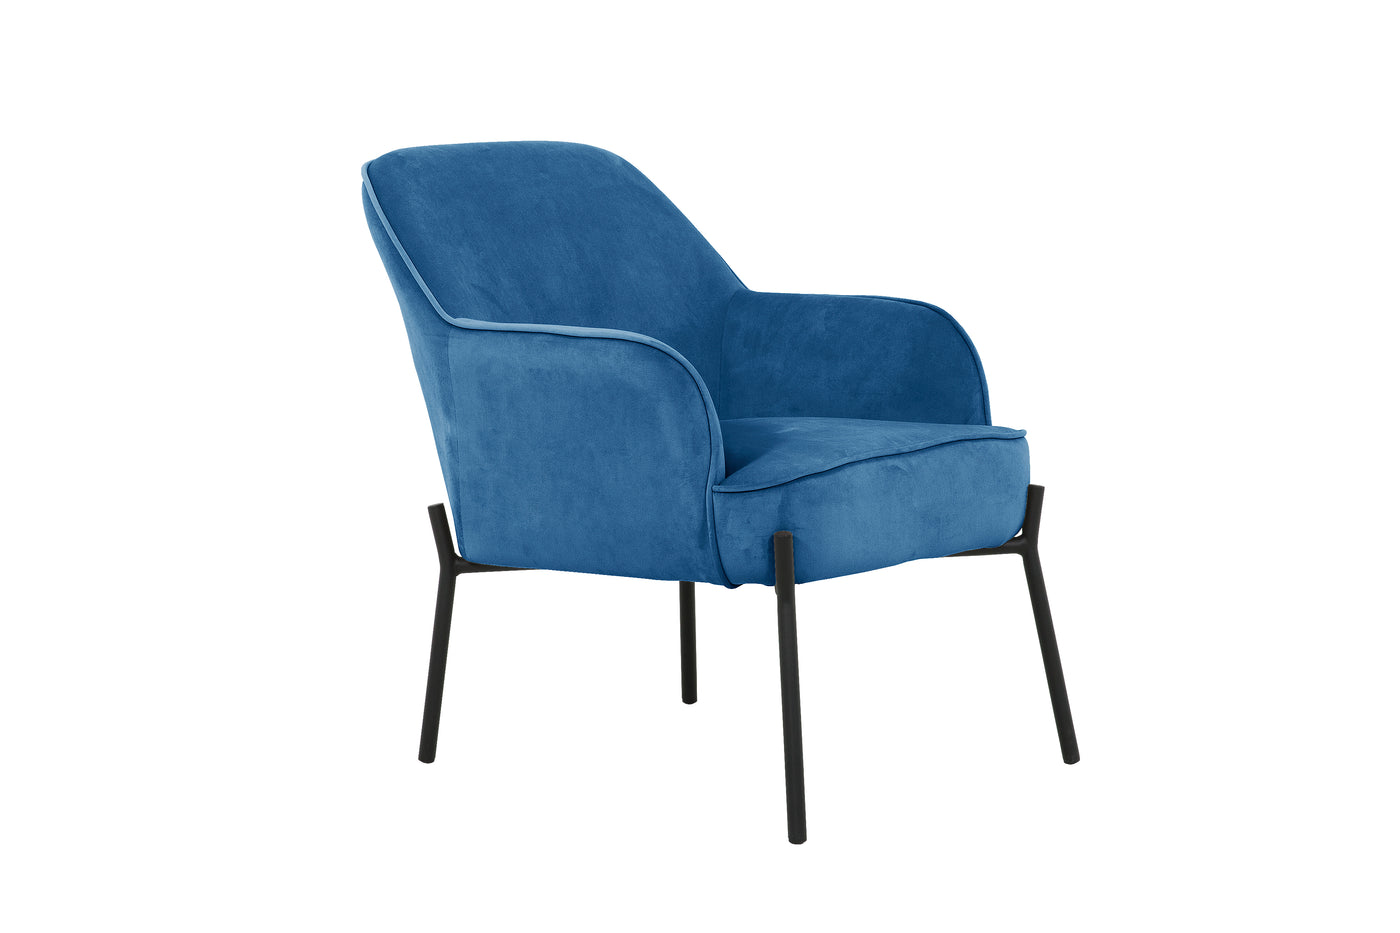 Morley Accent Chair - Navy